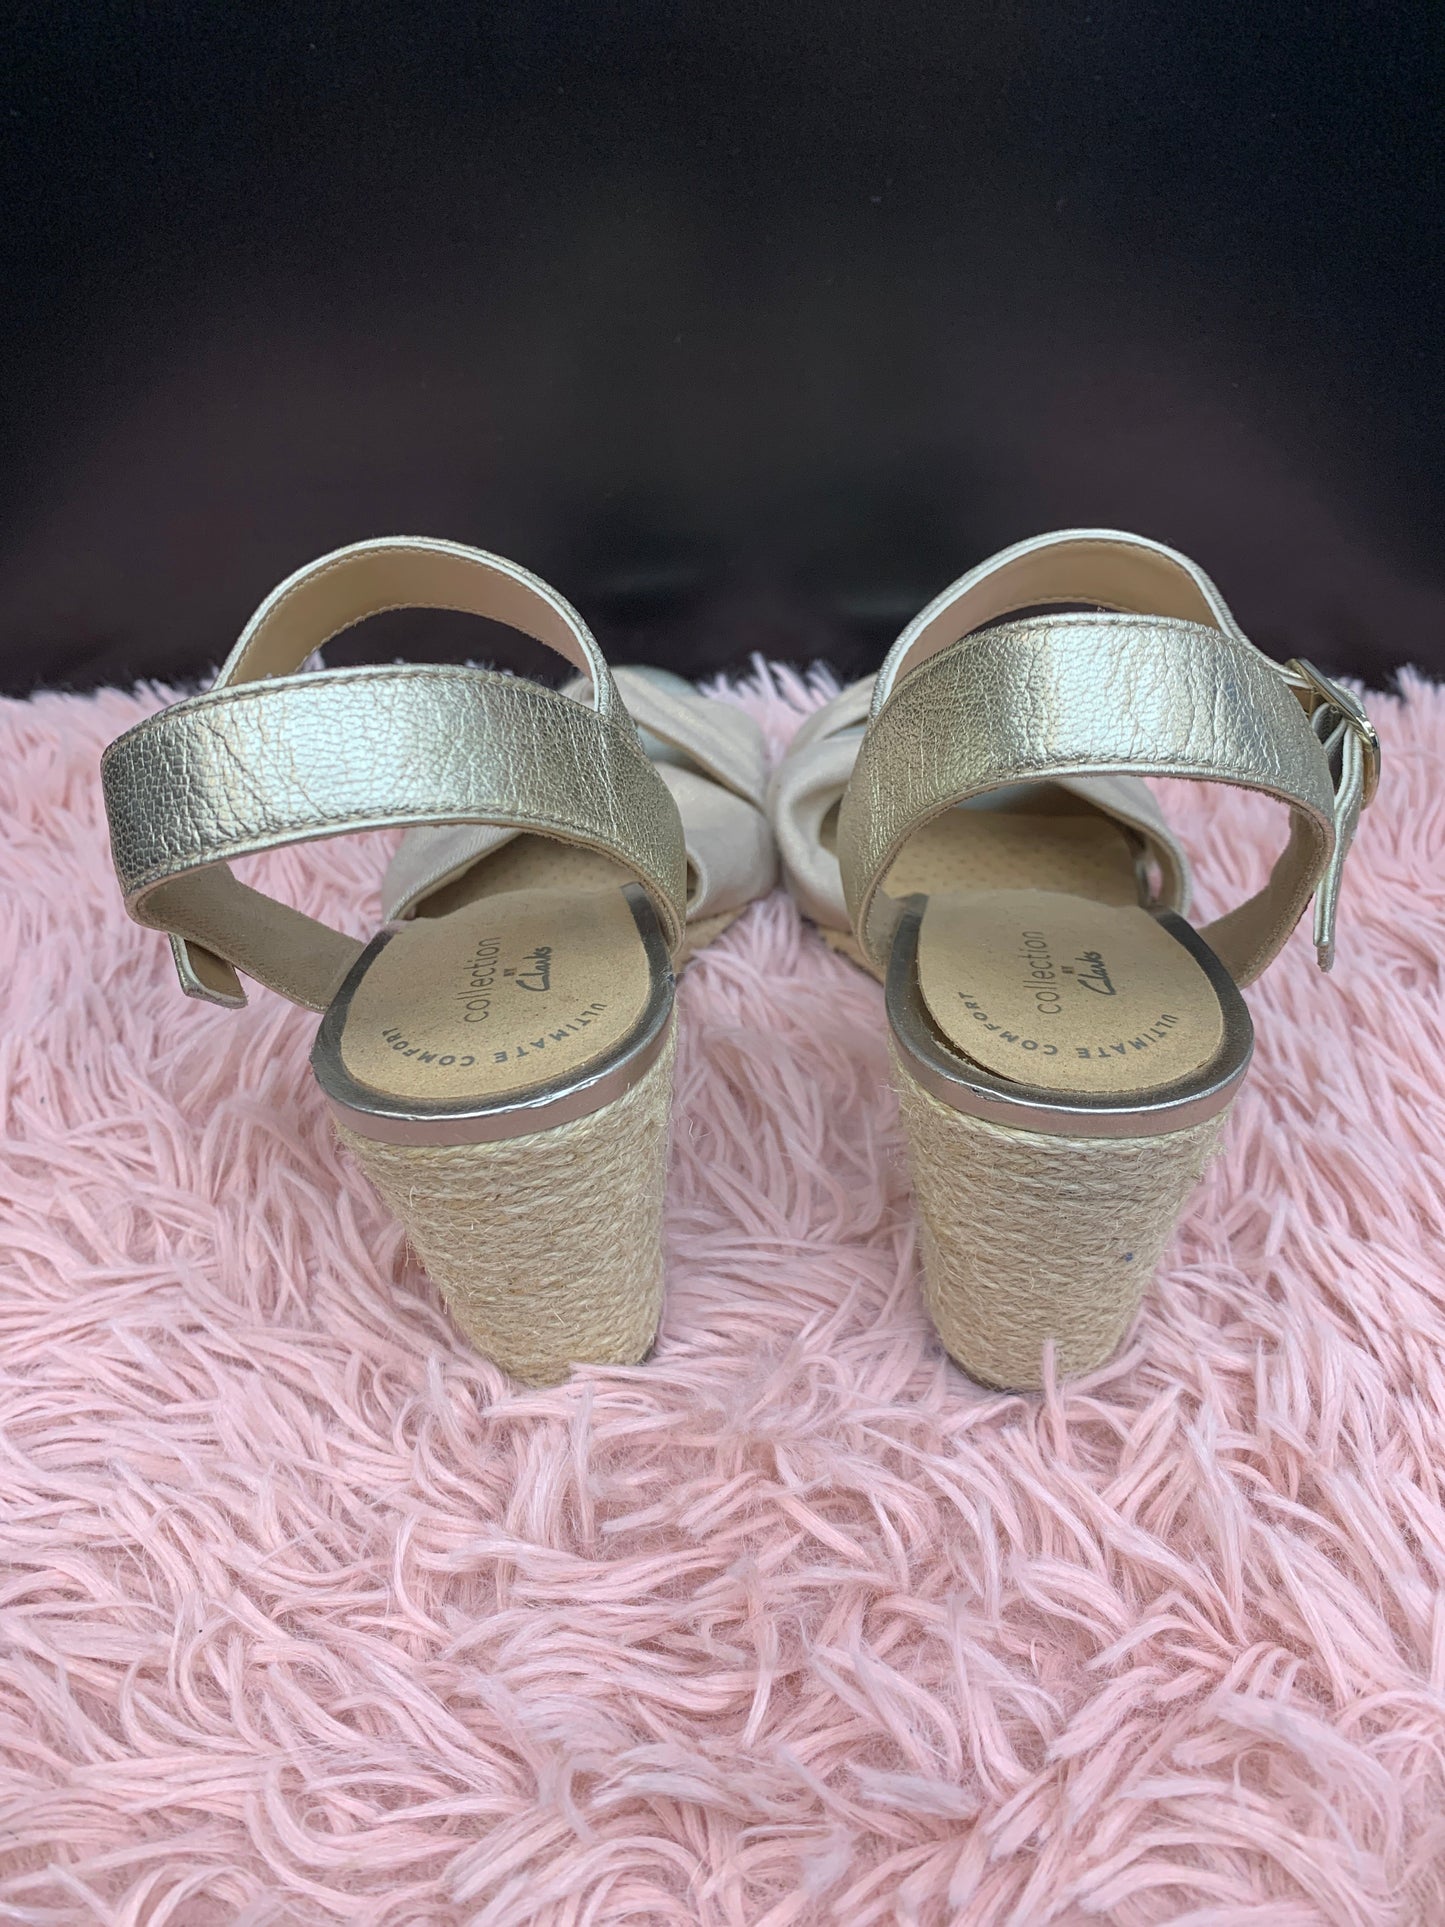 Shoes Heels Wedge By Clarks  Size: 9.5